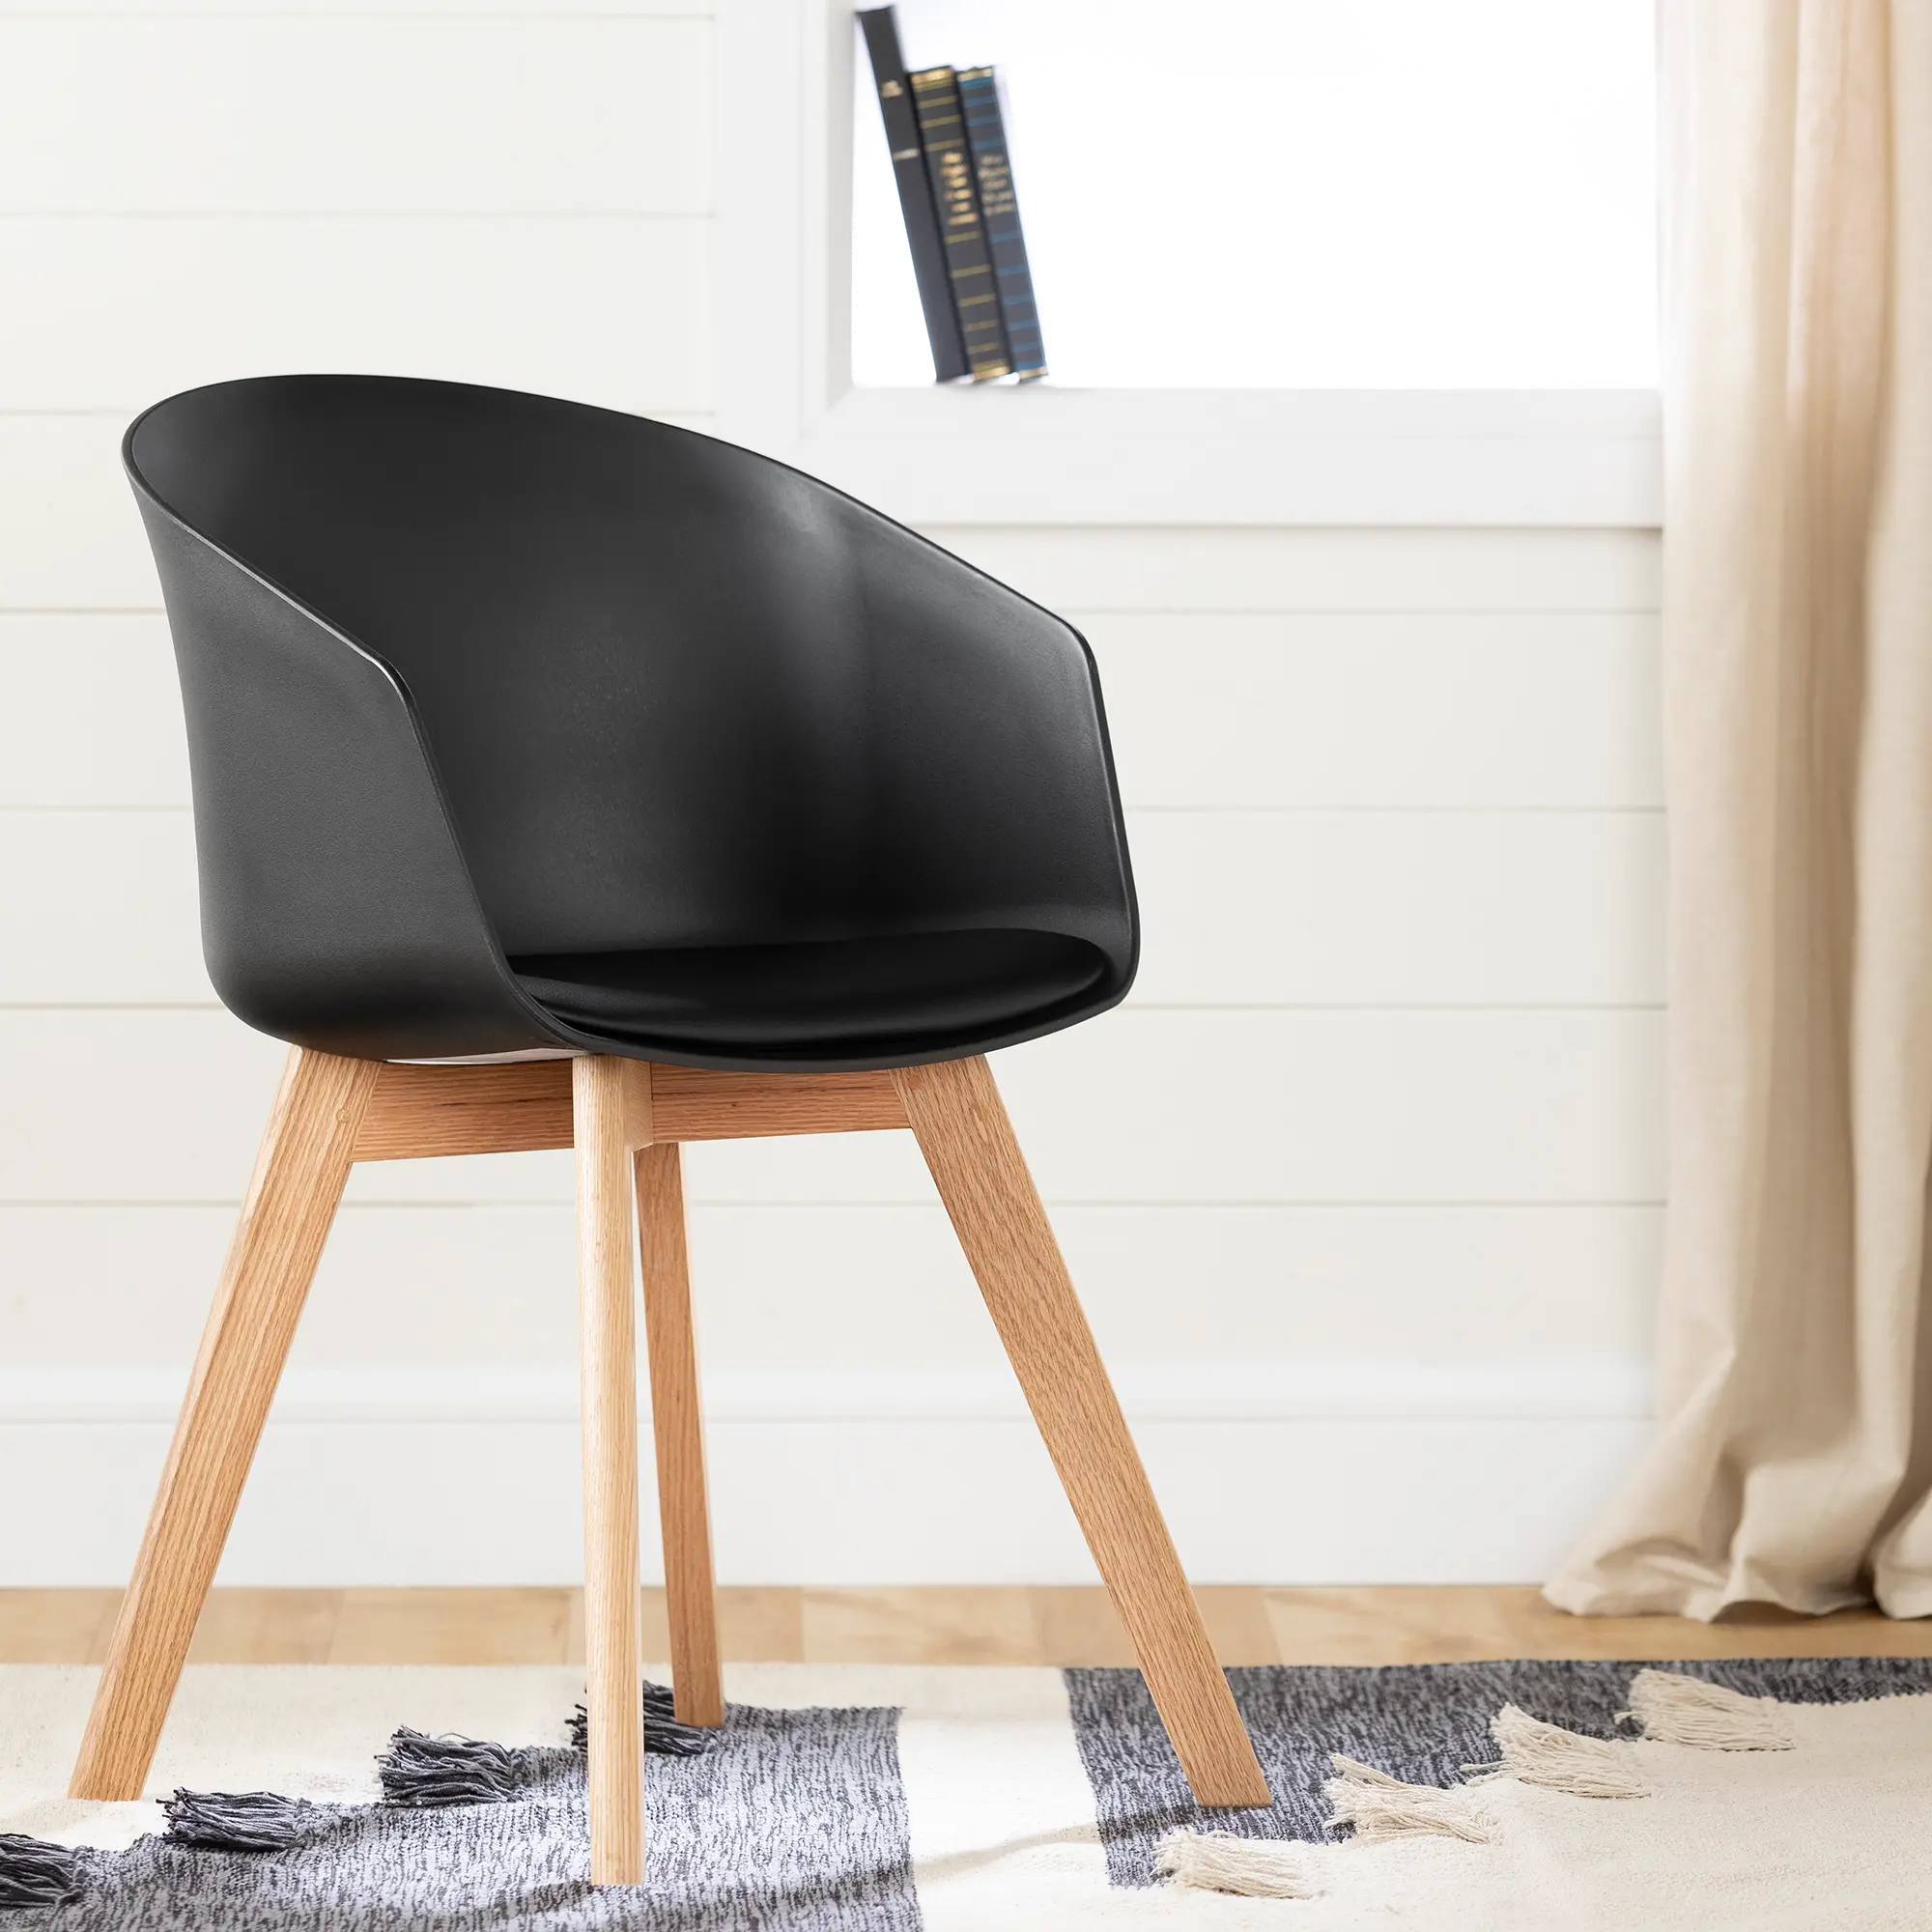 Photos - Chair South Shore Flam Black and Natural Dining Room  - South Shore 100410